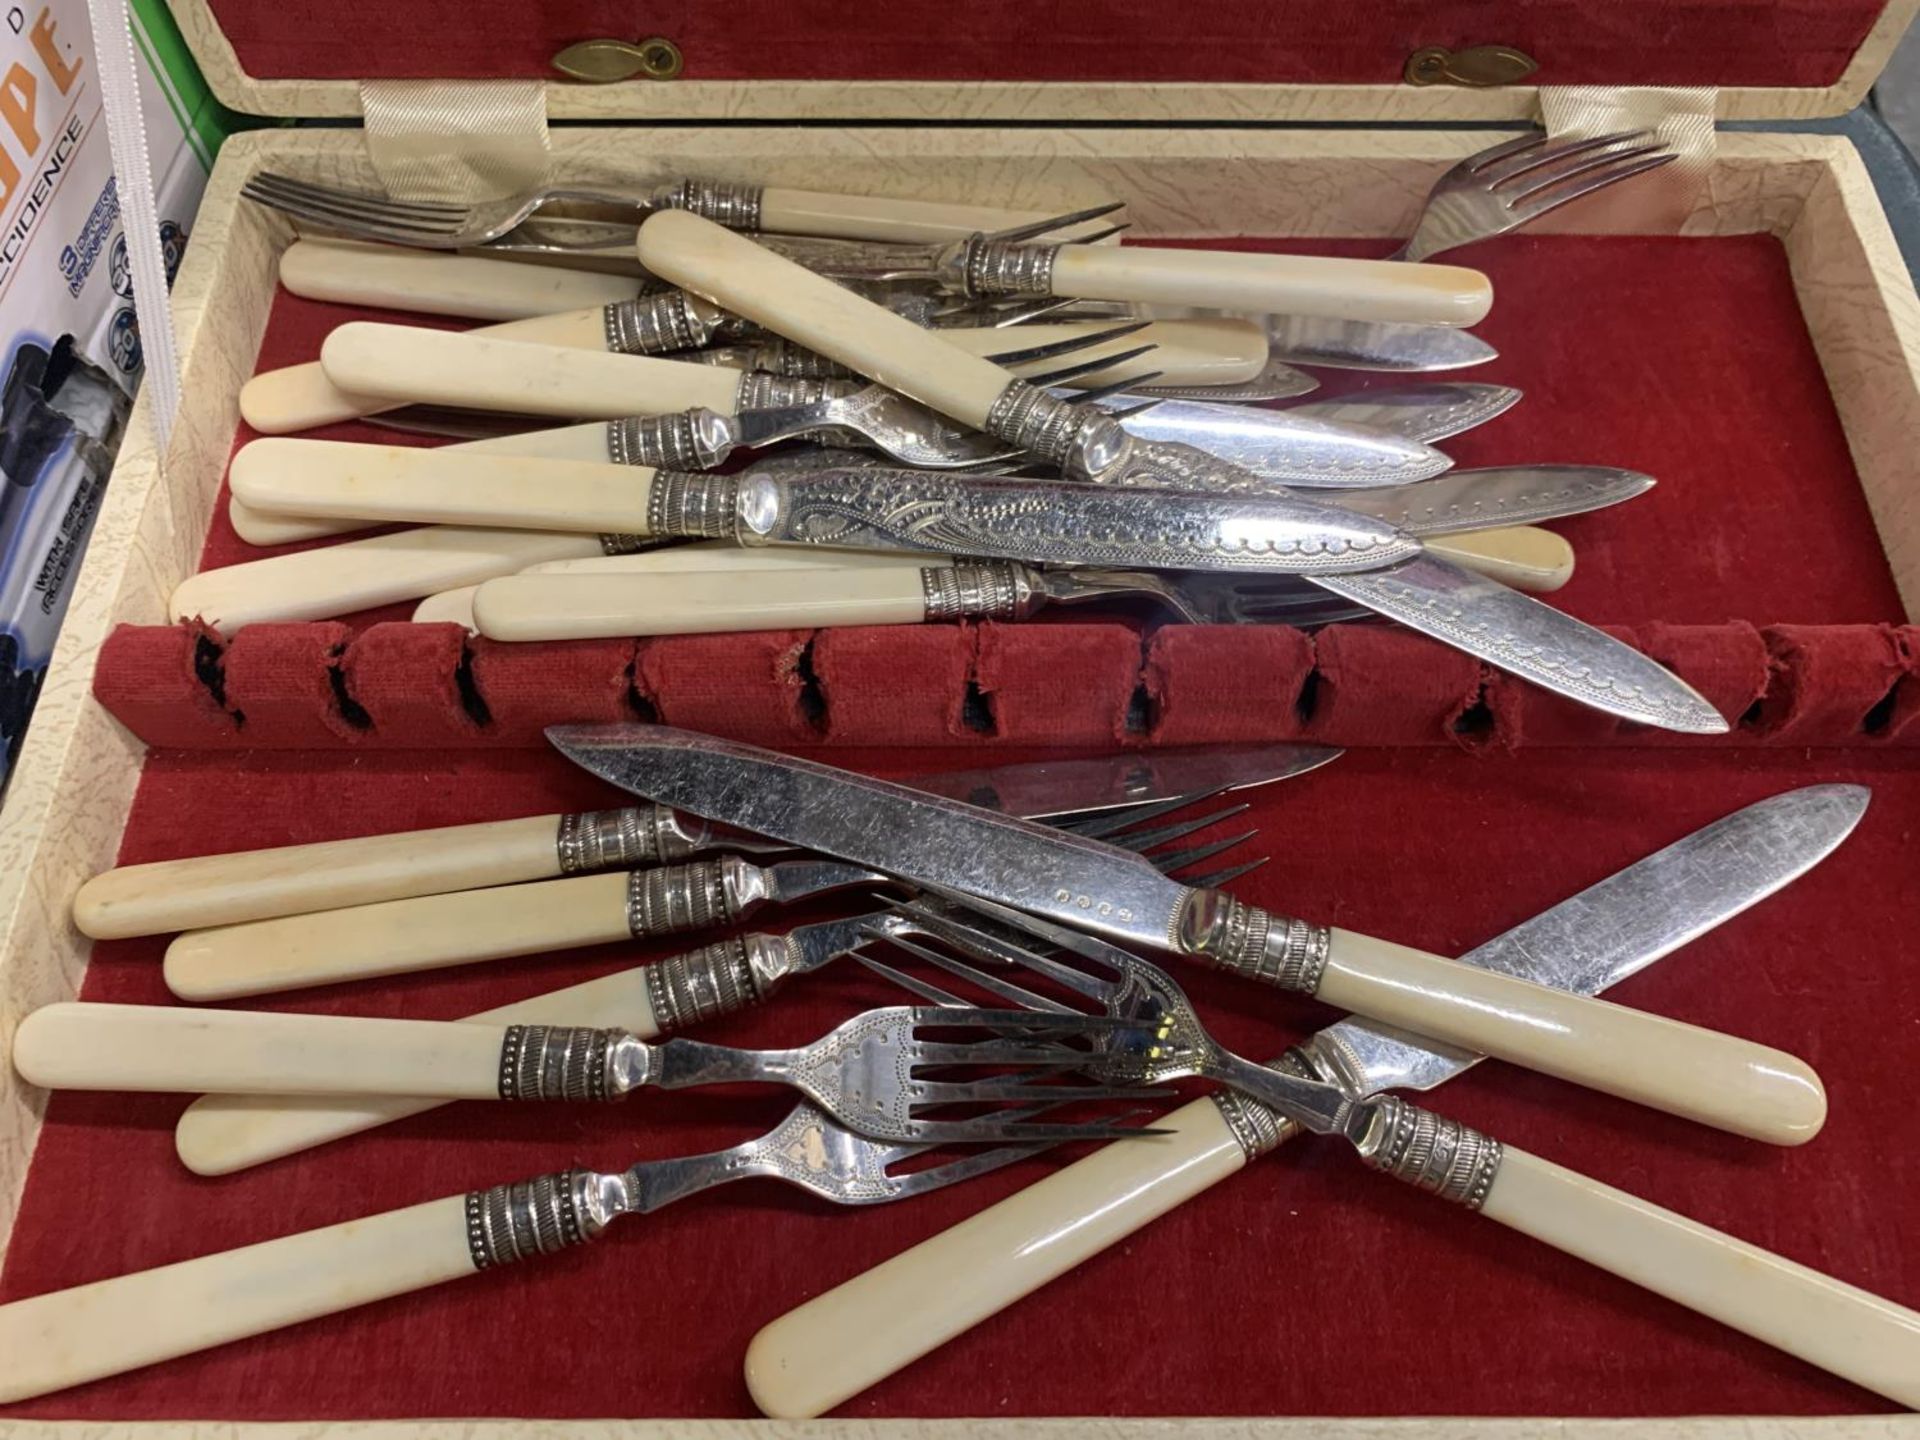 A SET OF VINTAGE KNIVES AND FORKS IN A BOX PLUS AN EMPTY MAHOGANY FLATWARE BOX - Image 3 of 3